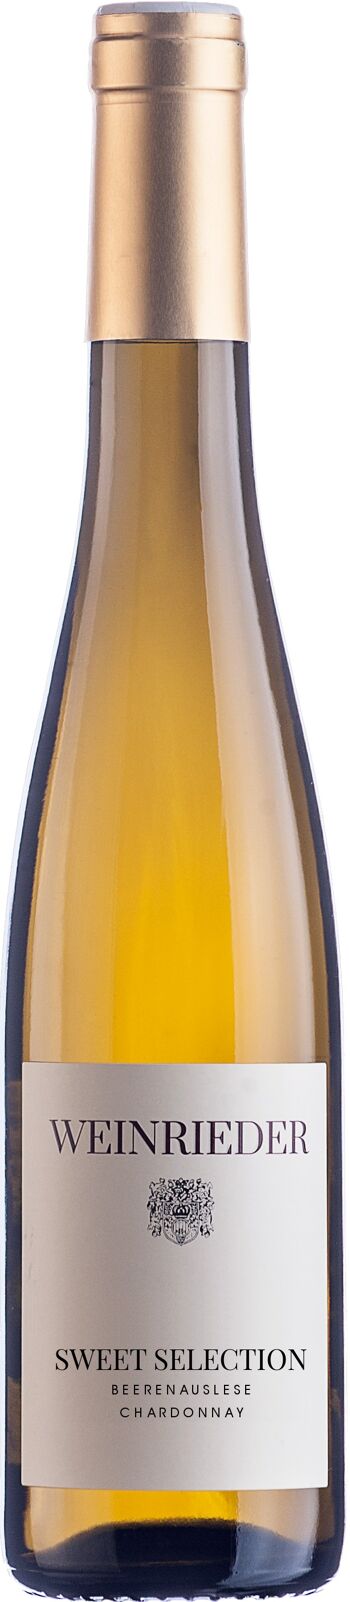 Sélection Douce - Beerenauslese Chardonnay 2015